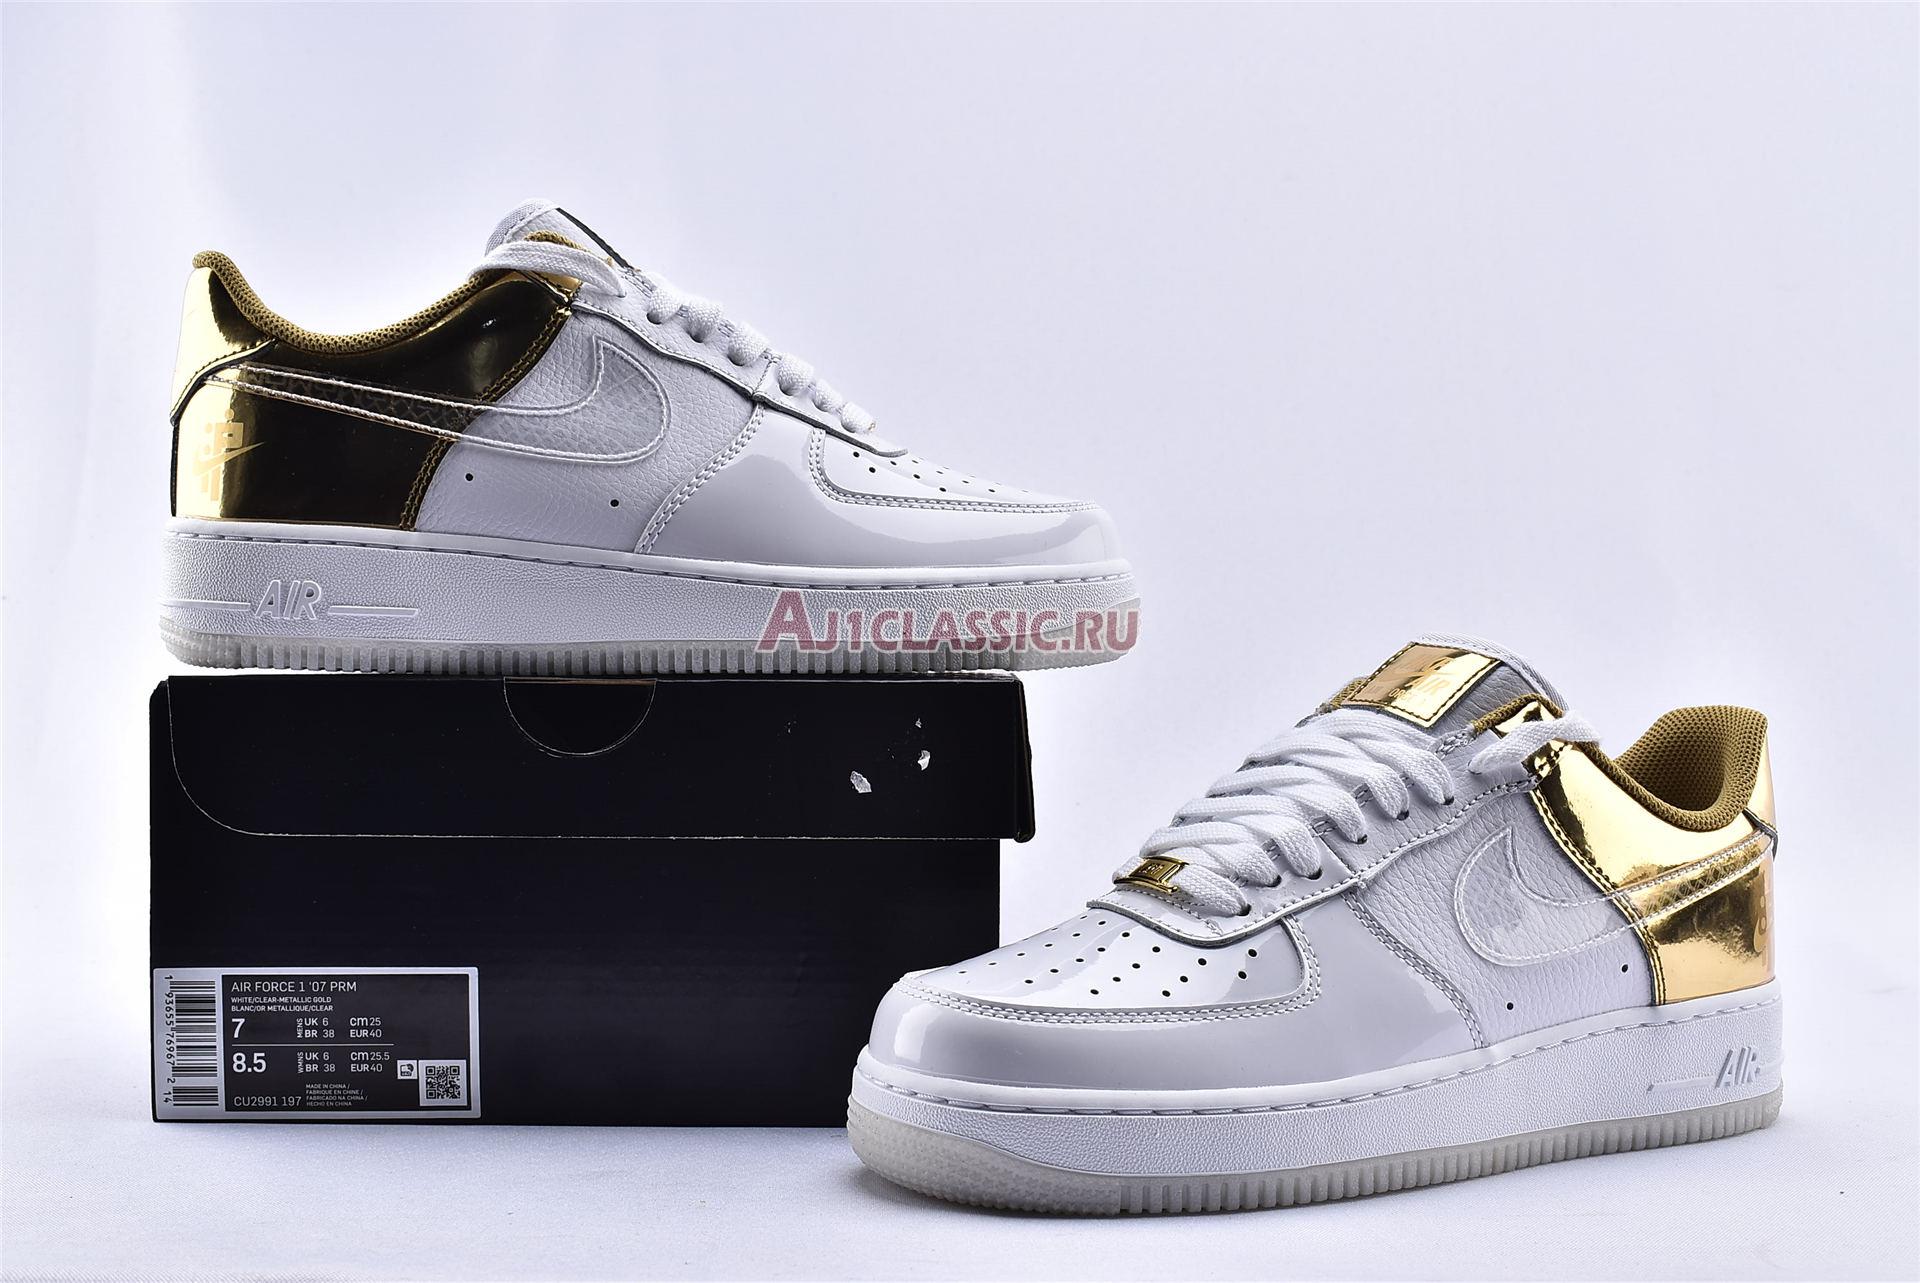 Nike Air Force 1 07 PRM Shanghai CU2991-197 White/Metal Gold/Light Gold/Clear Sneakers